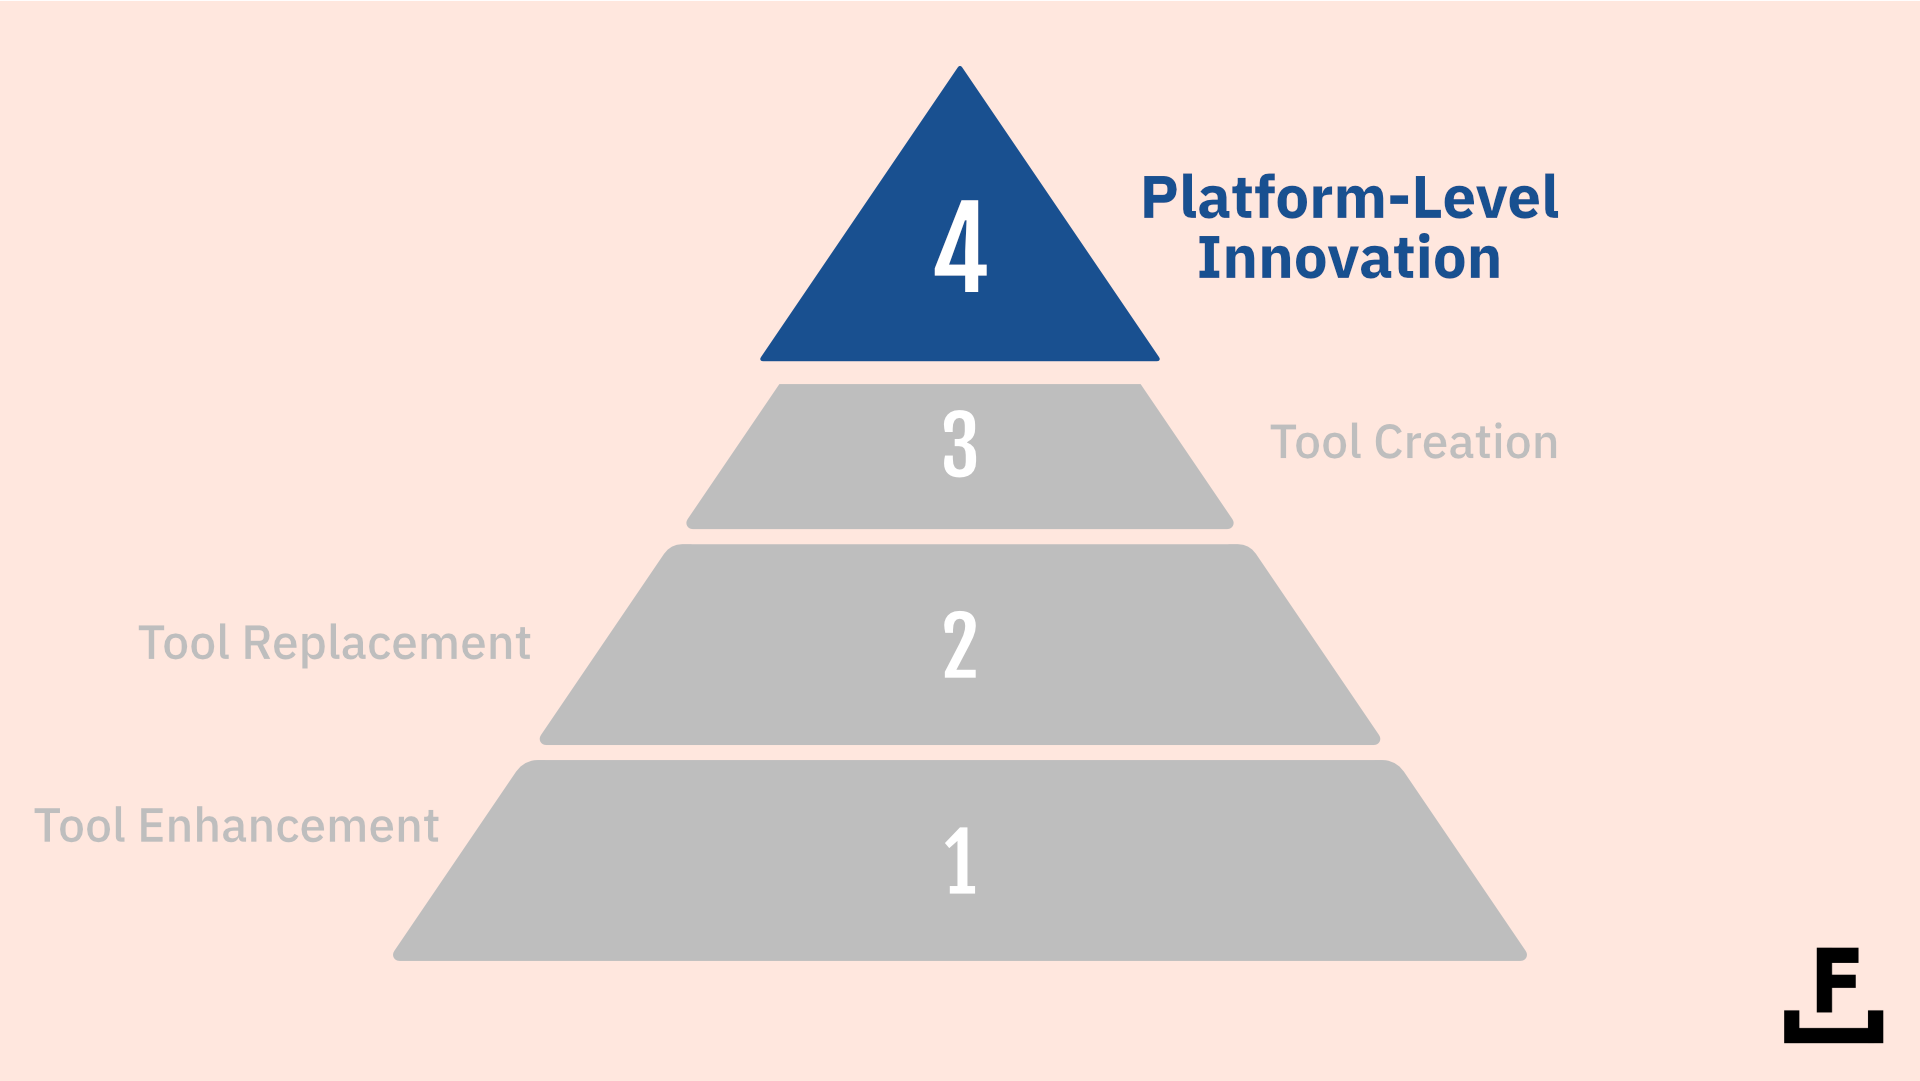 A pyramid of types of AI tools, highlighting the “Platform-Level Innovation” level.